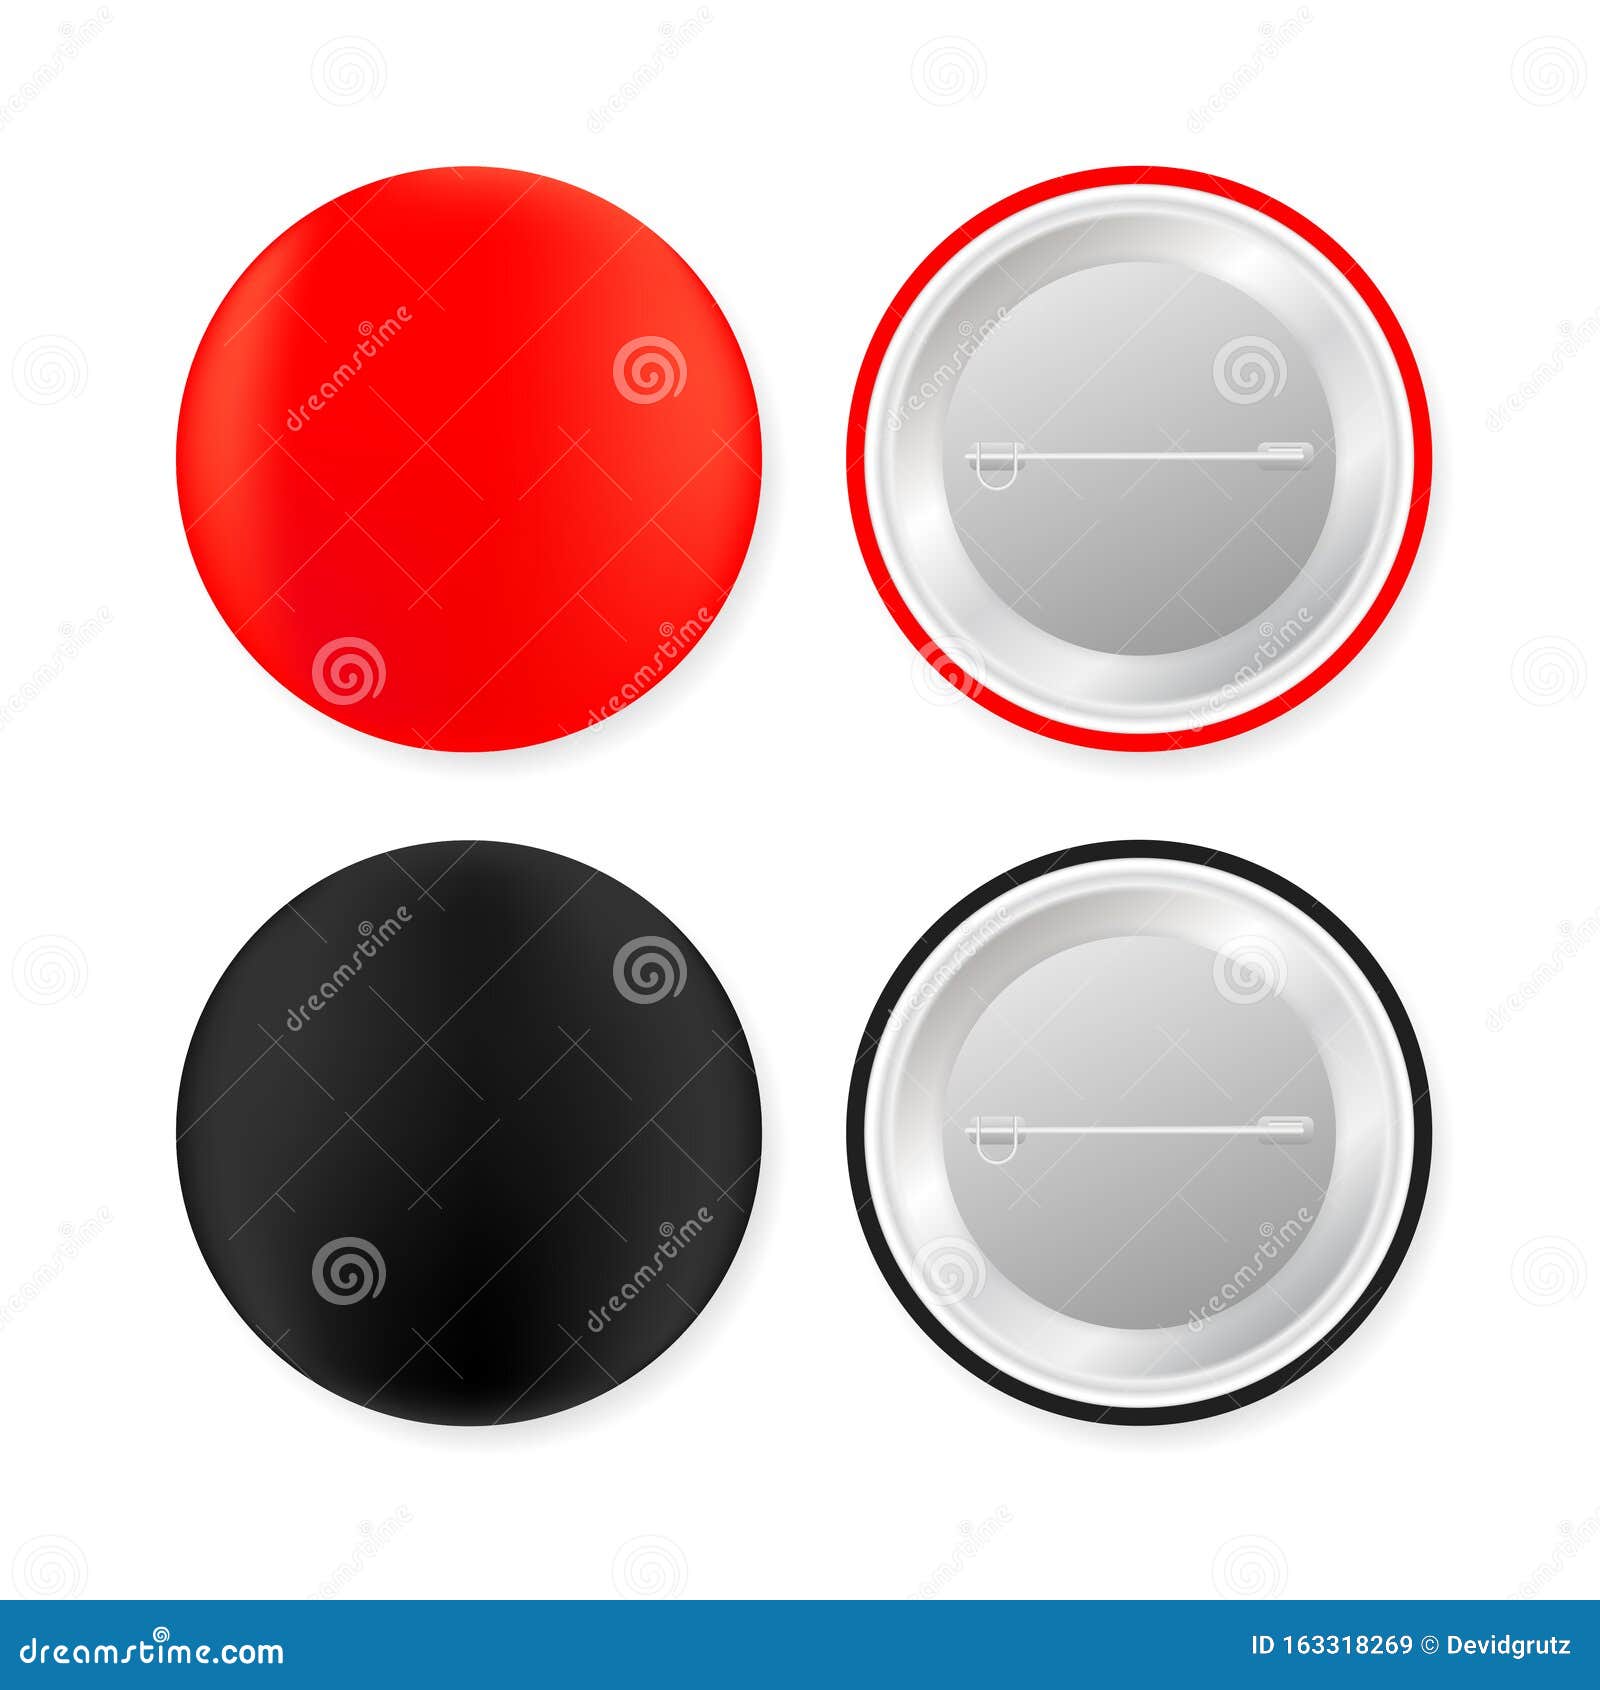 pin badges. red and black round blank button. souvenir magnet badging mockup.  stock 